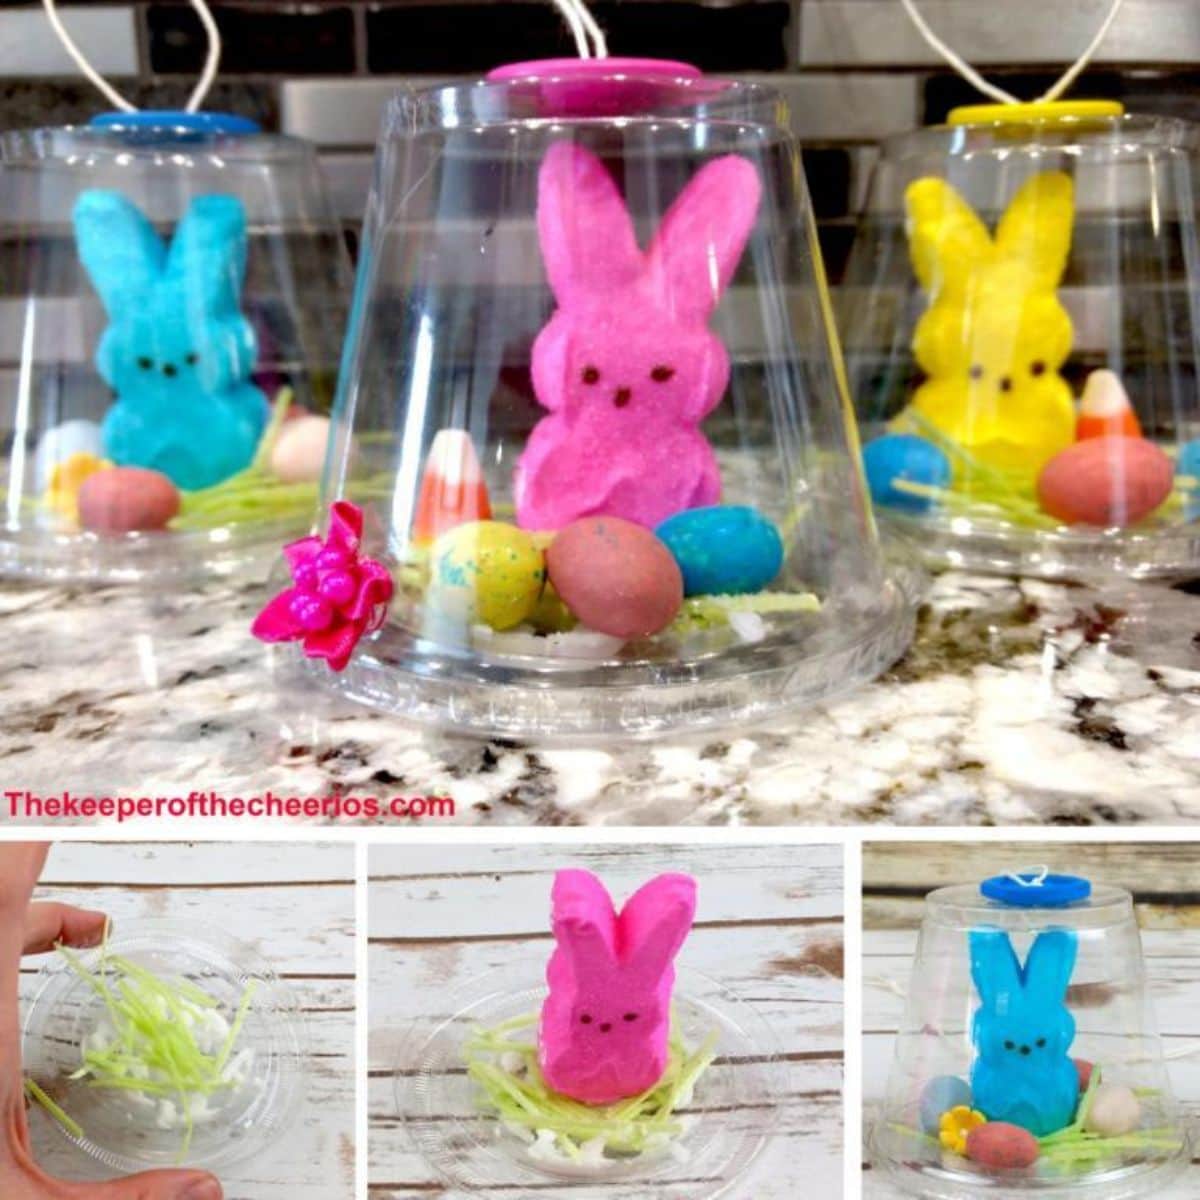 3 colored bunnies sit under plastic tubs surrounded by chocolate eggs in candy colors